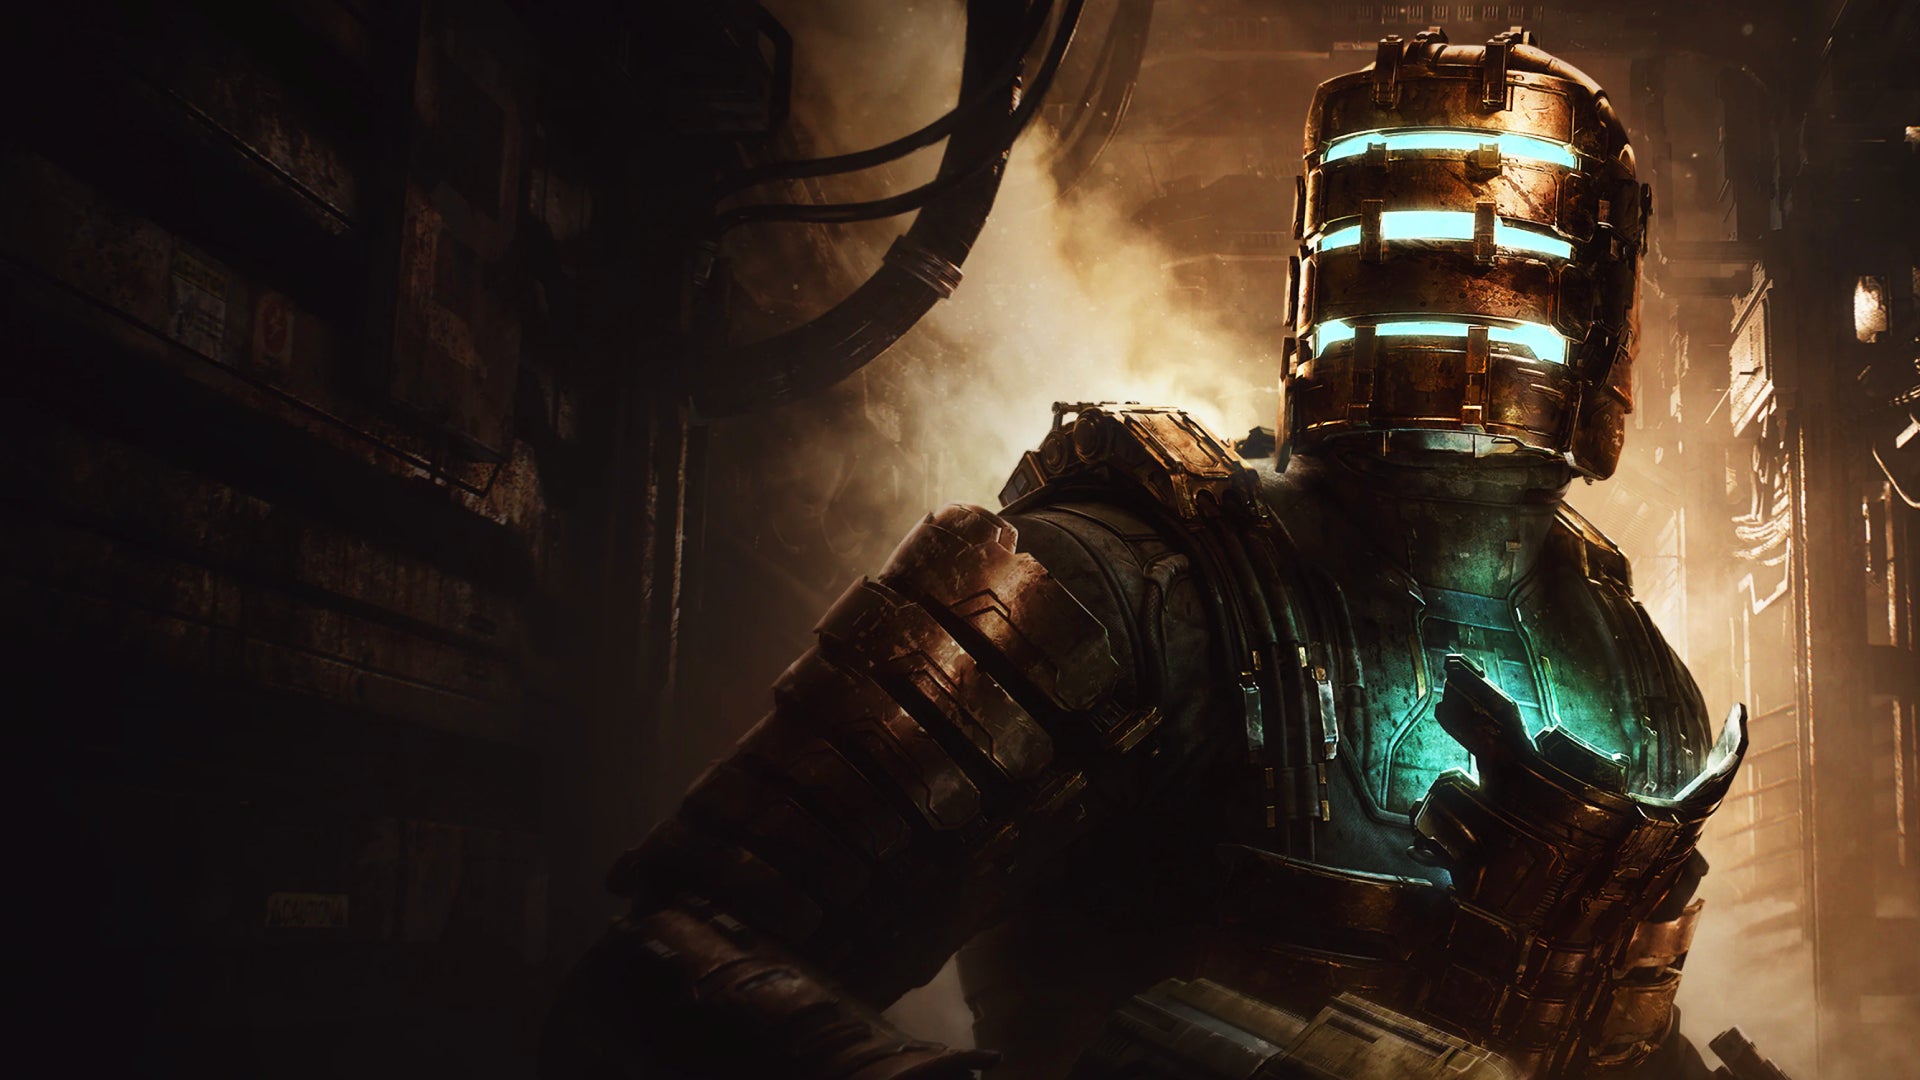 Image for EA is asking fans if they'd like Dead Space 2 or 3 remakes